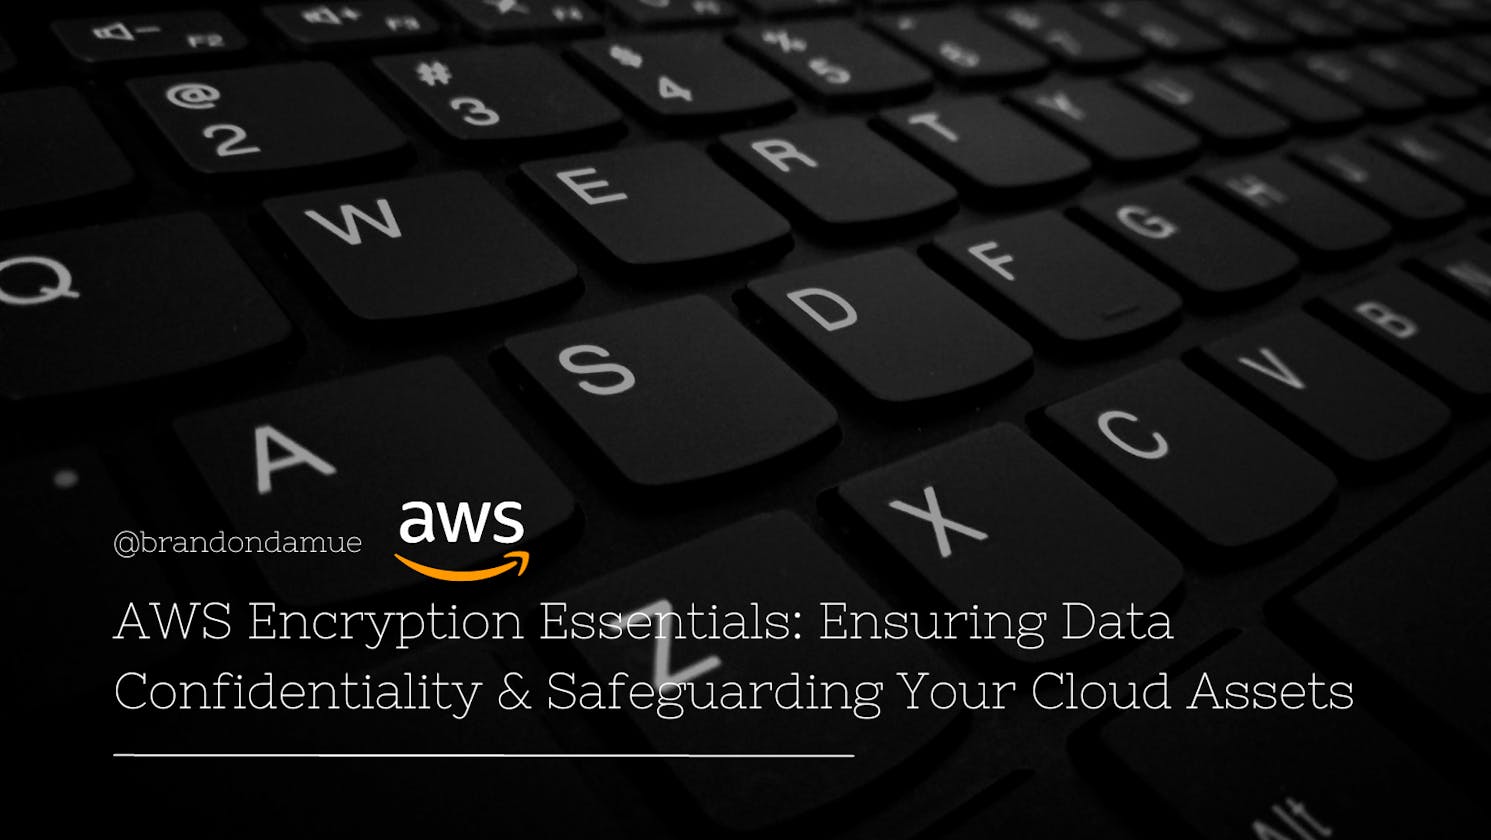 AWS Encryption Essentials: Ensuring Data Confidentiality & Safeguarding Your Cloud Assets